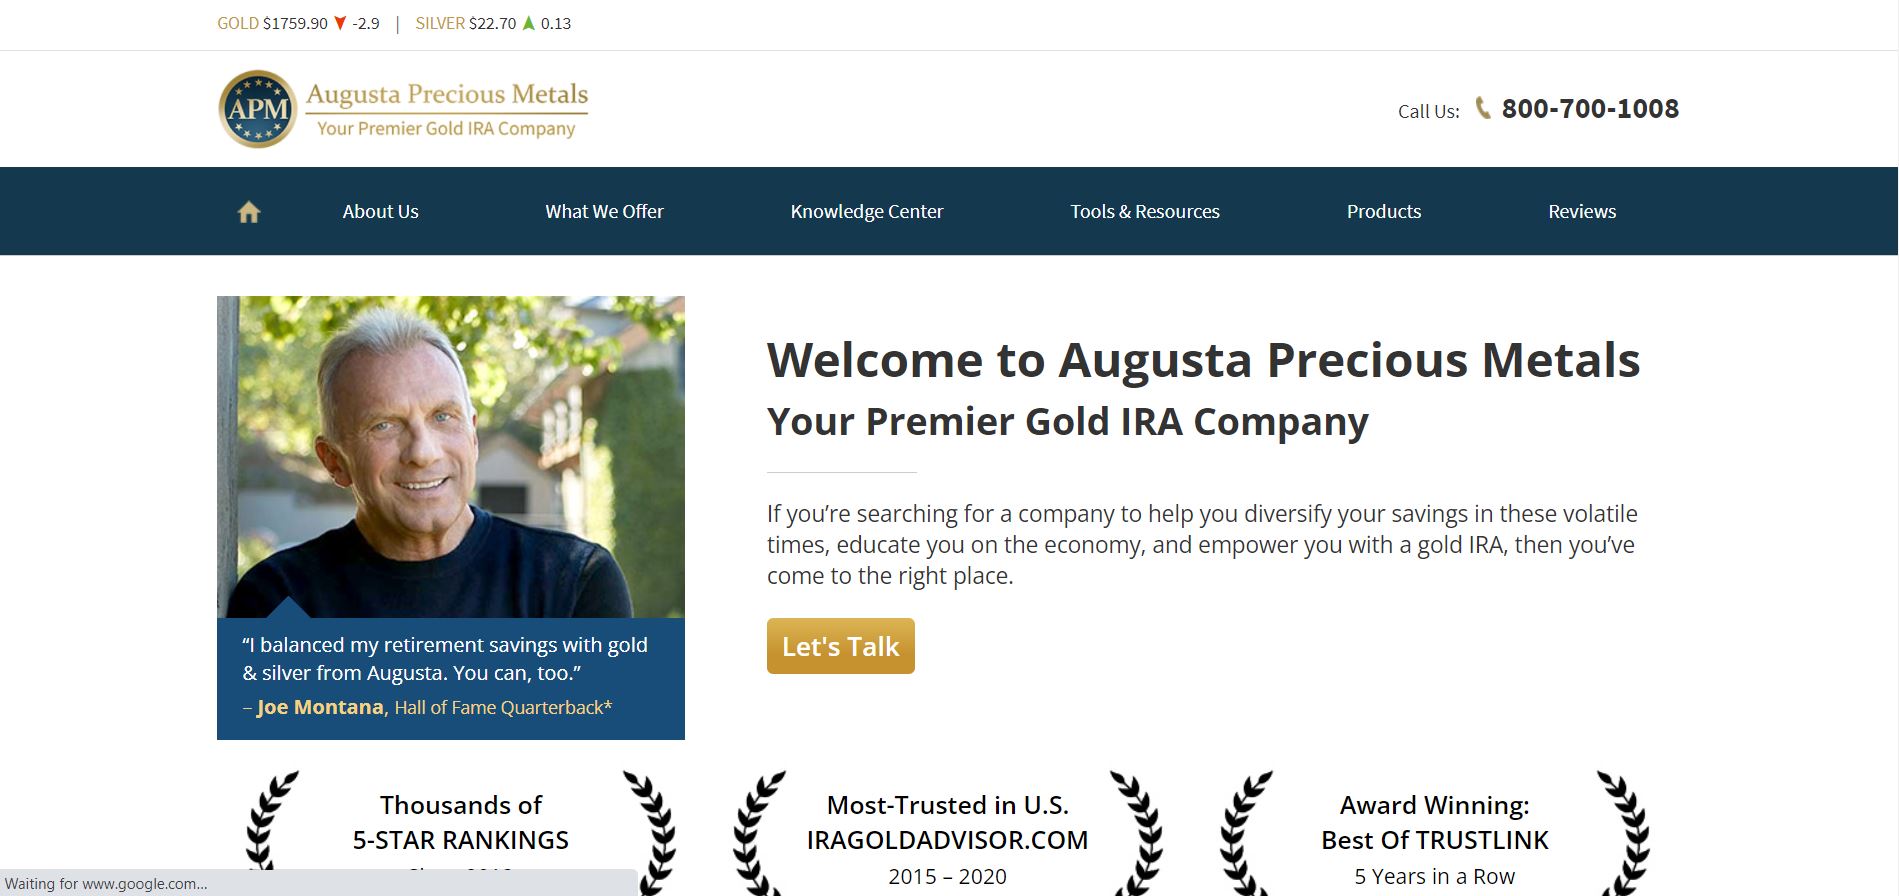 gold iras: An Incredibly Easy Method That Works For All